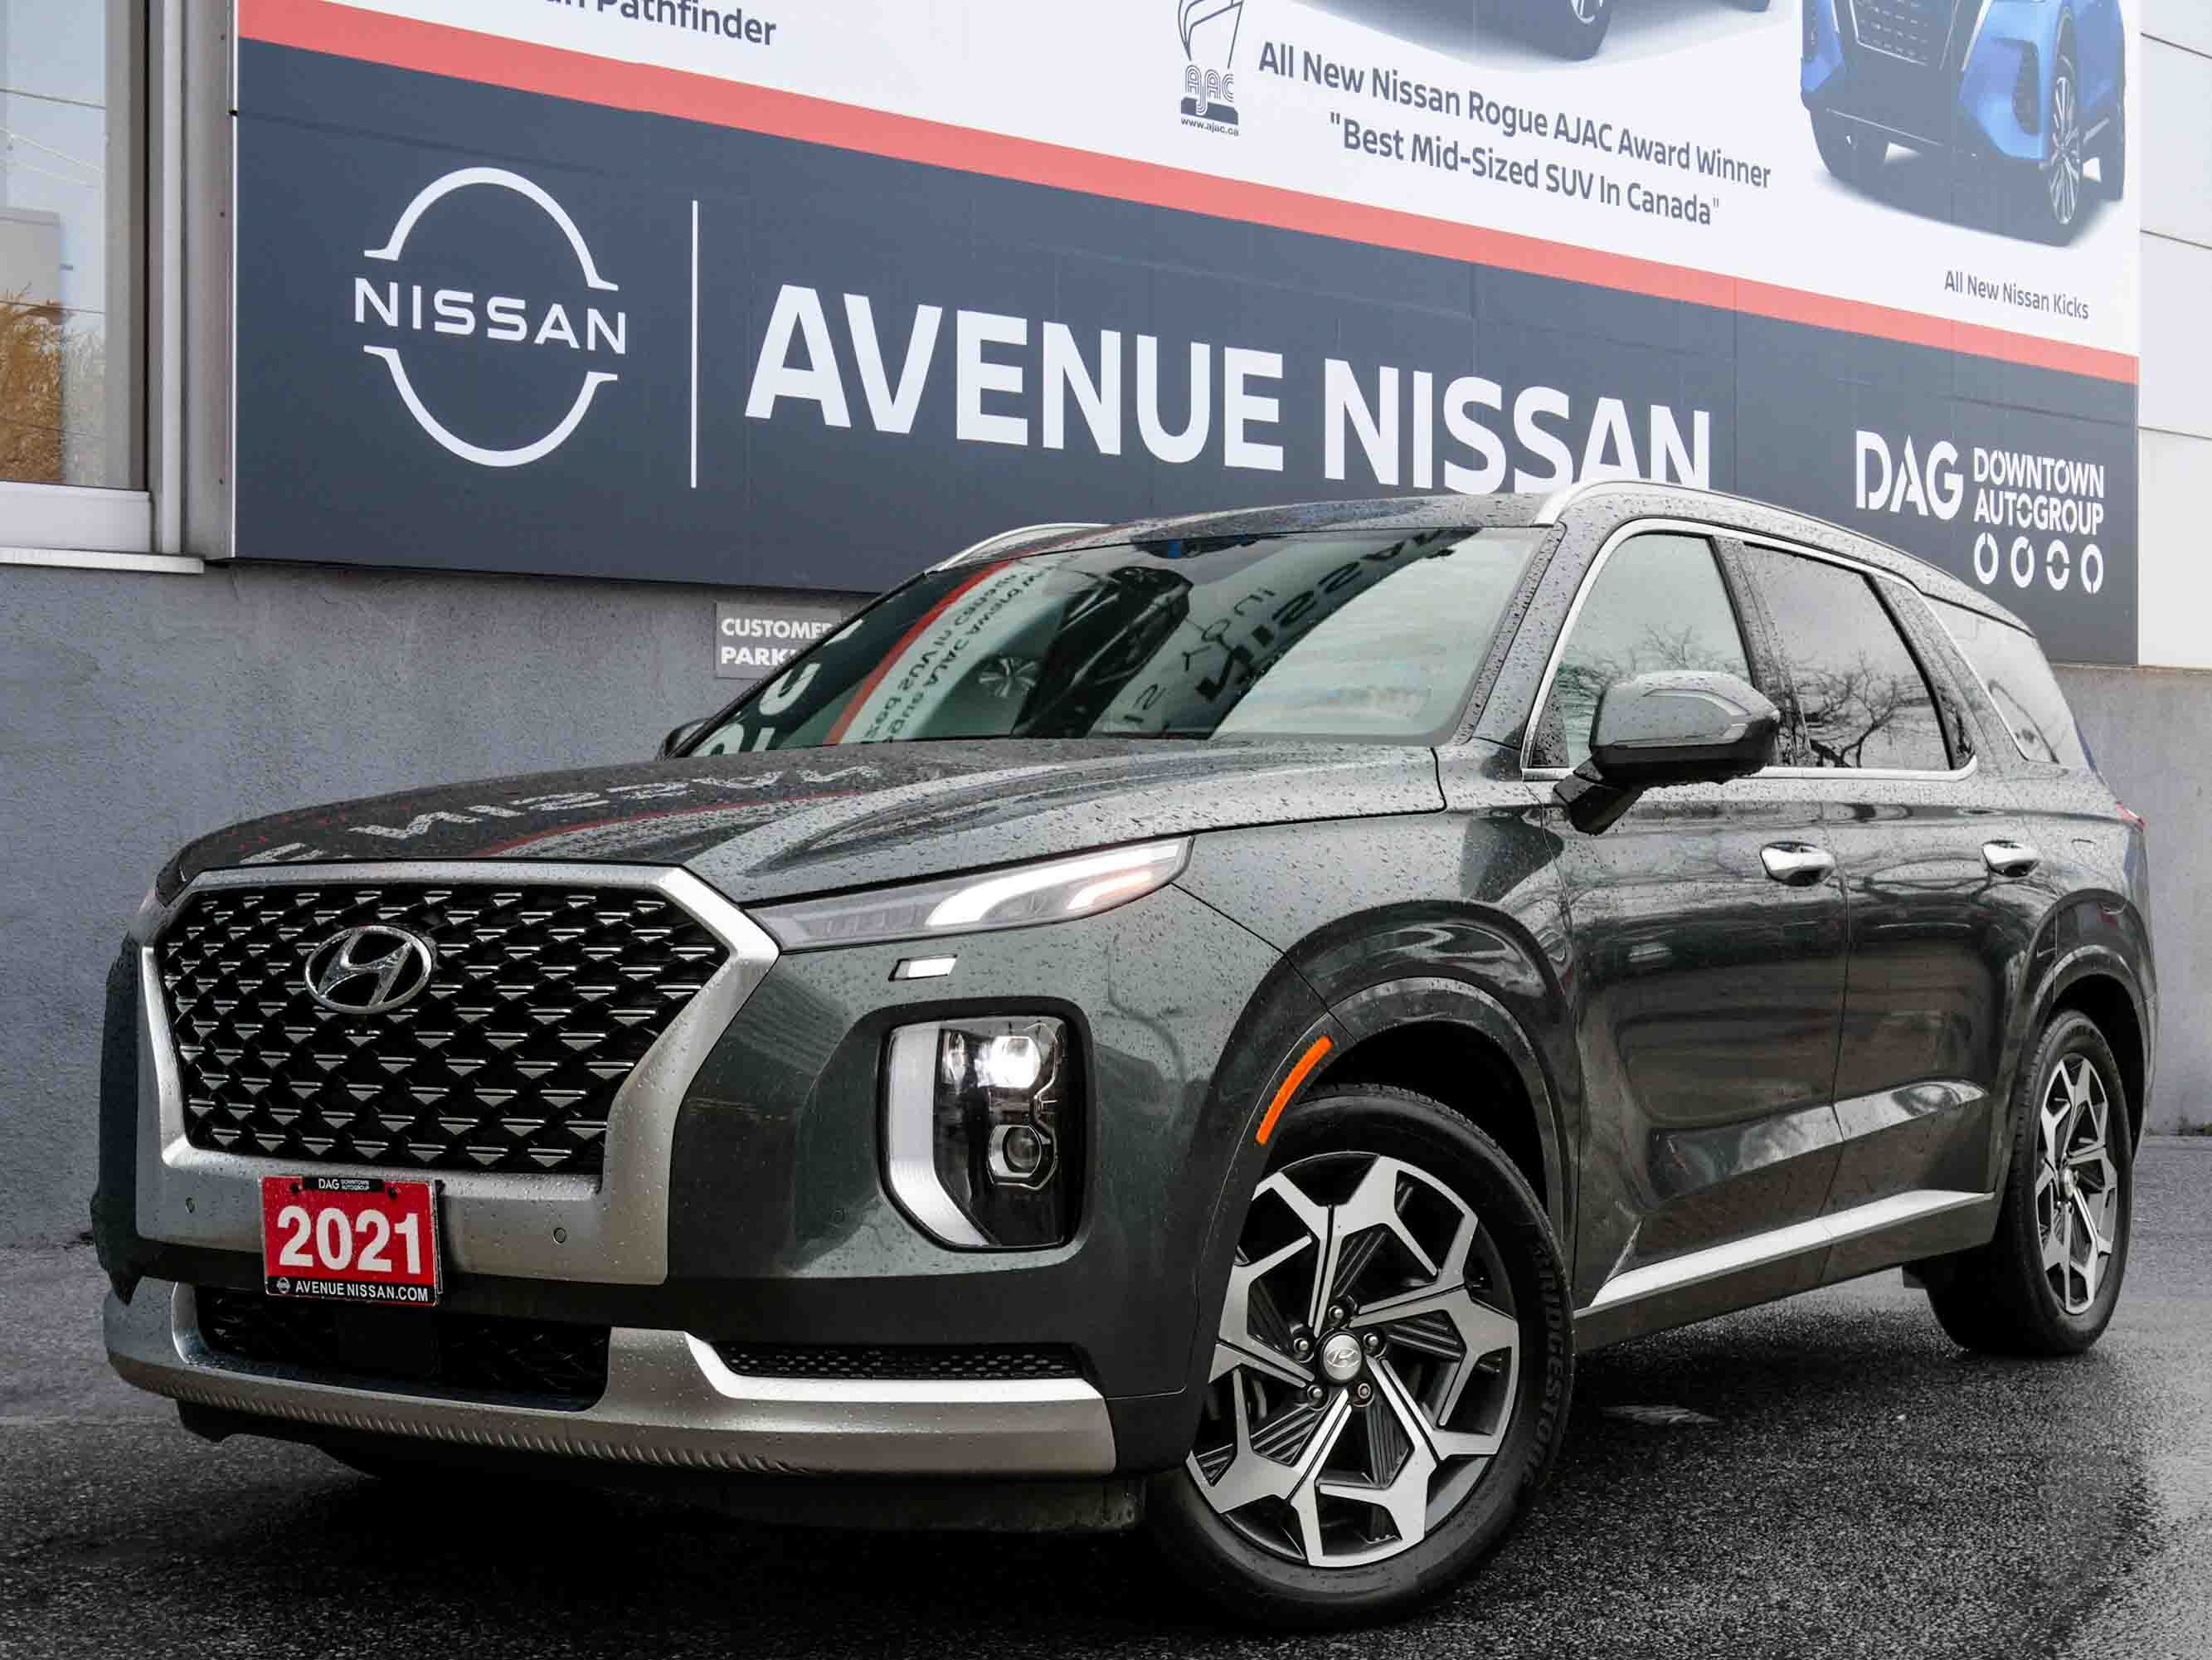 2021 Hyundai Palisade TOP OF THE LINE! EVERY OPTION 1 OWNER, BEAUTIFUL!!